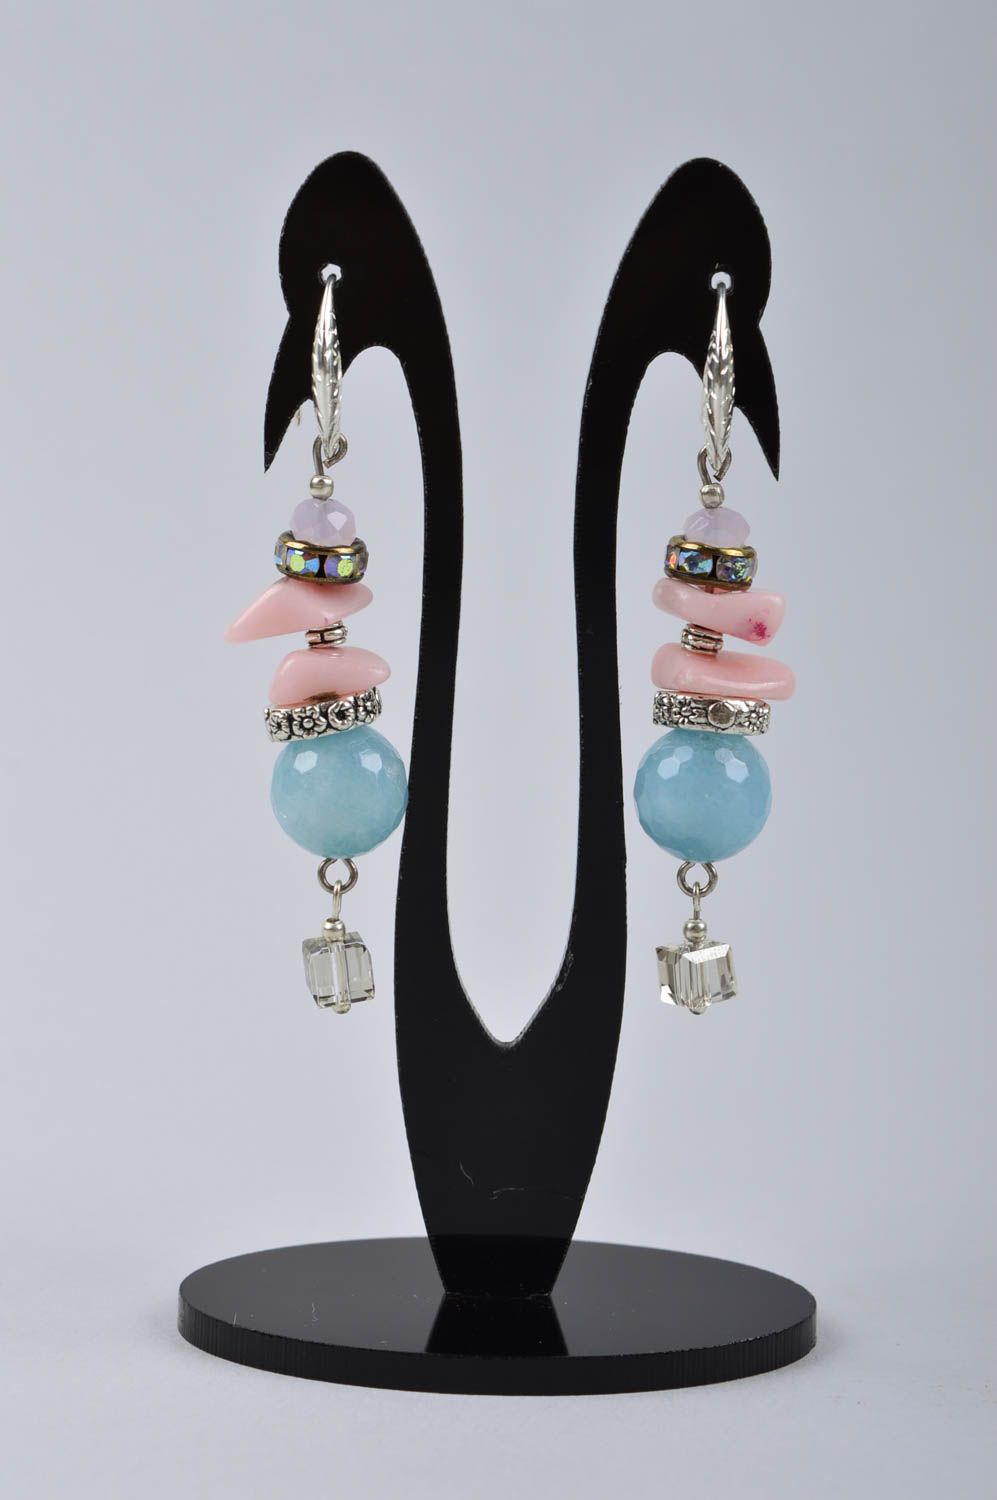 Designer accessory handmade earrings with agate pendants fashion jewelry photo 2